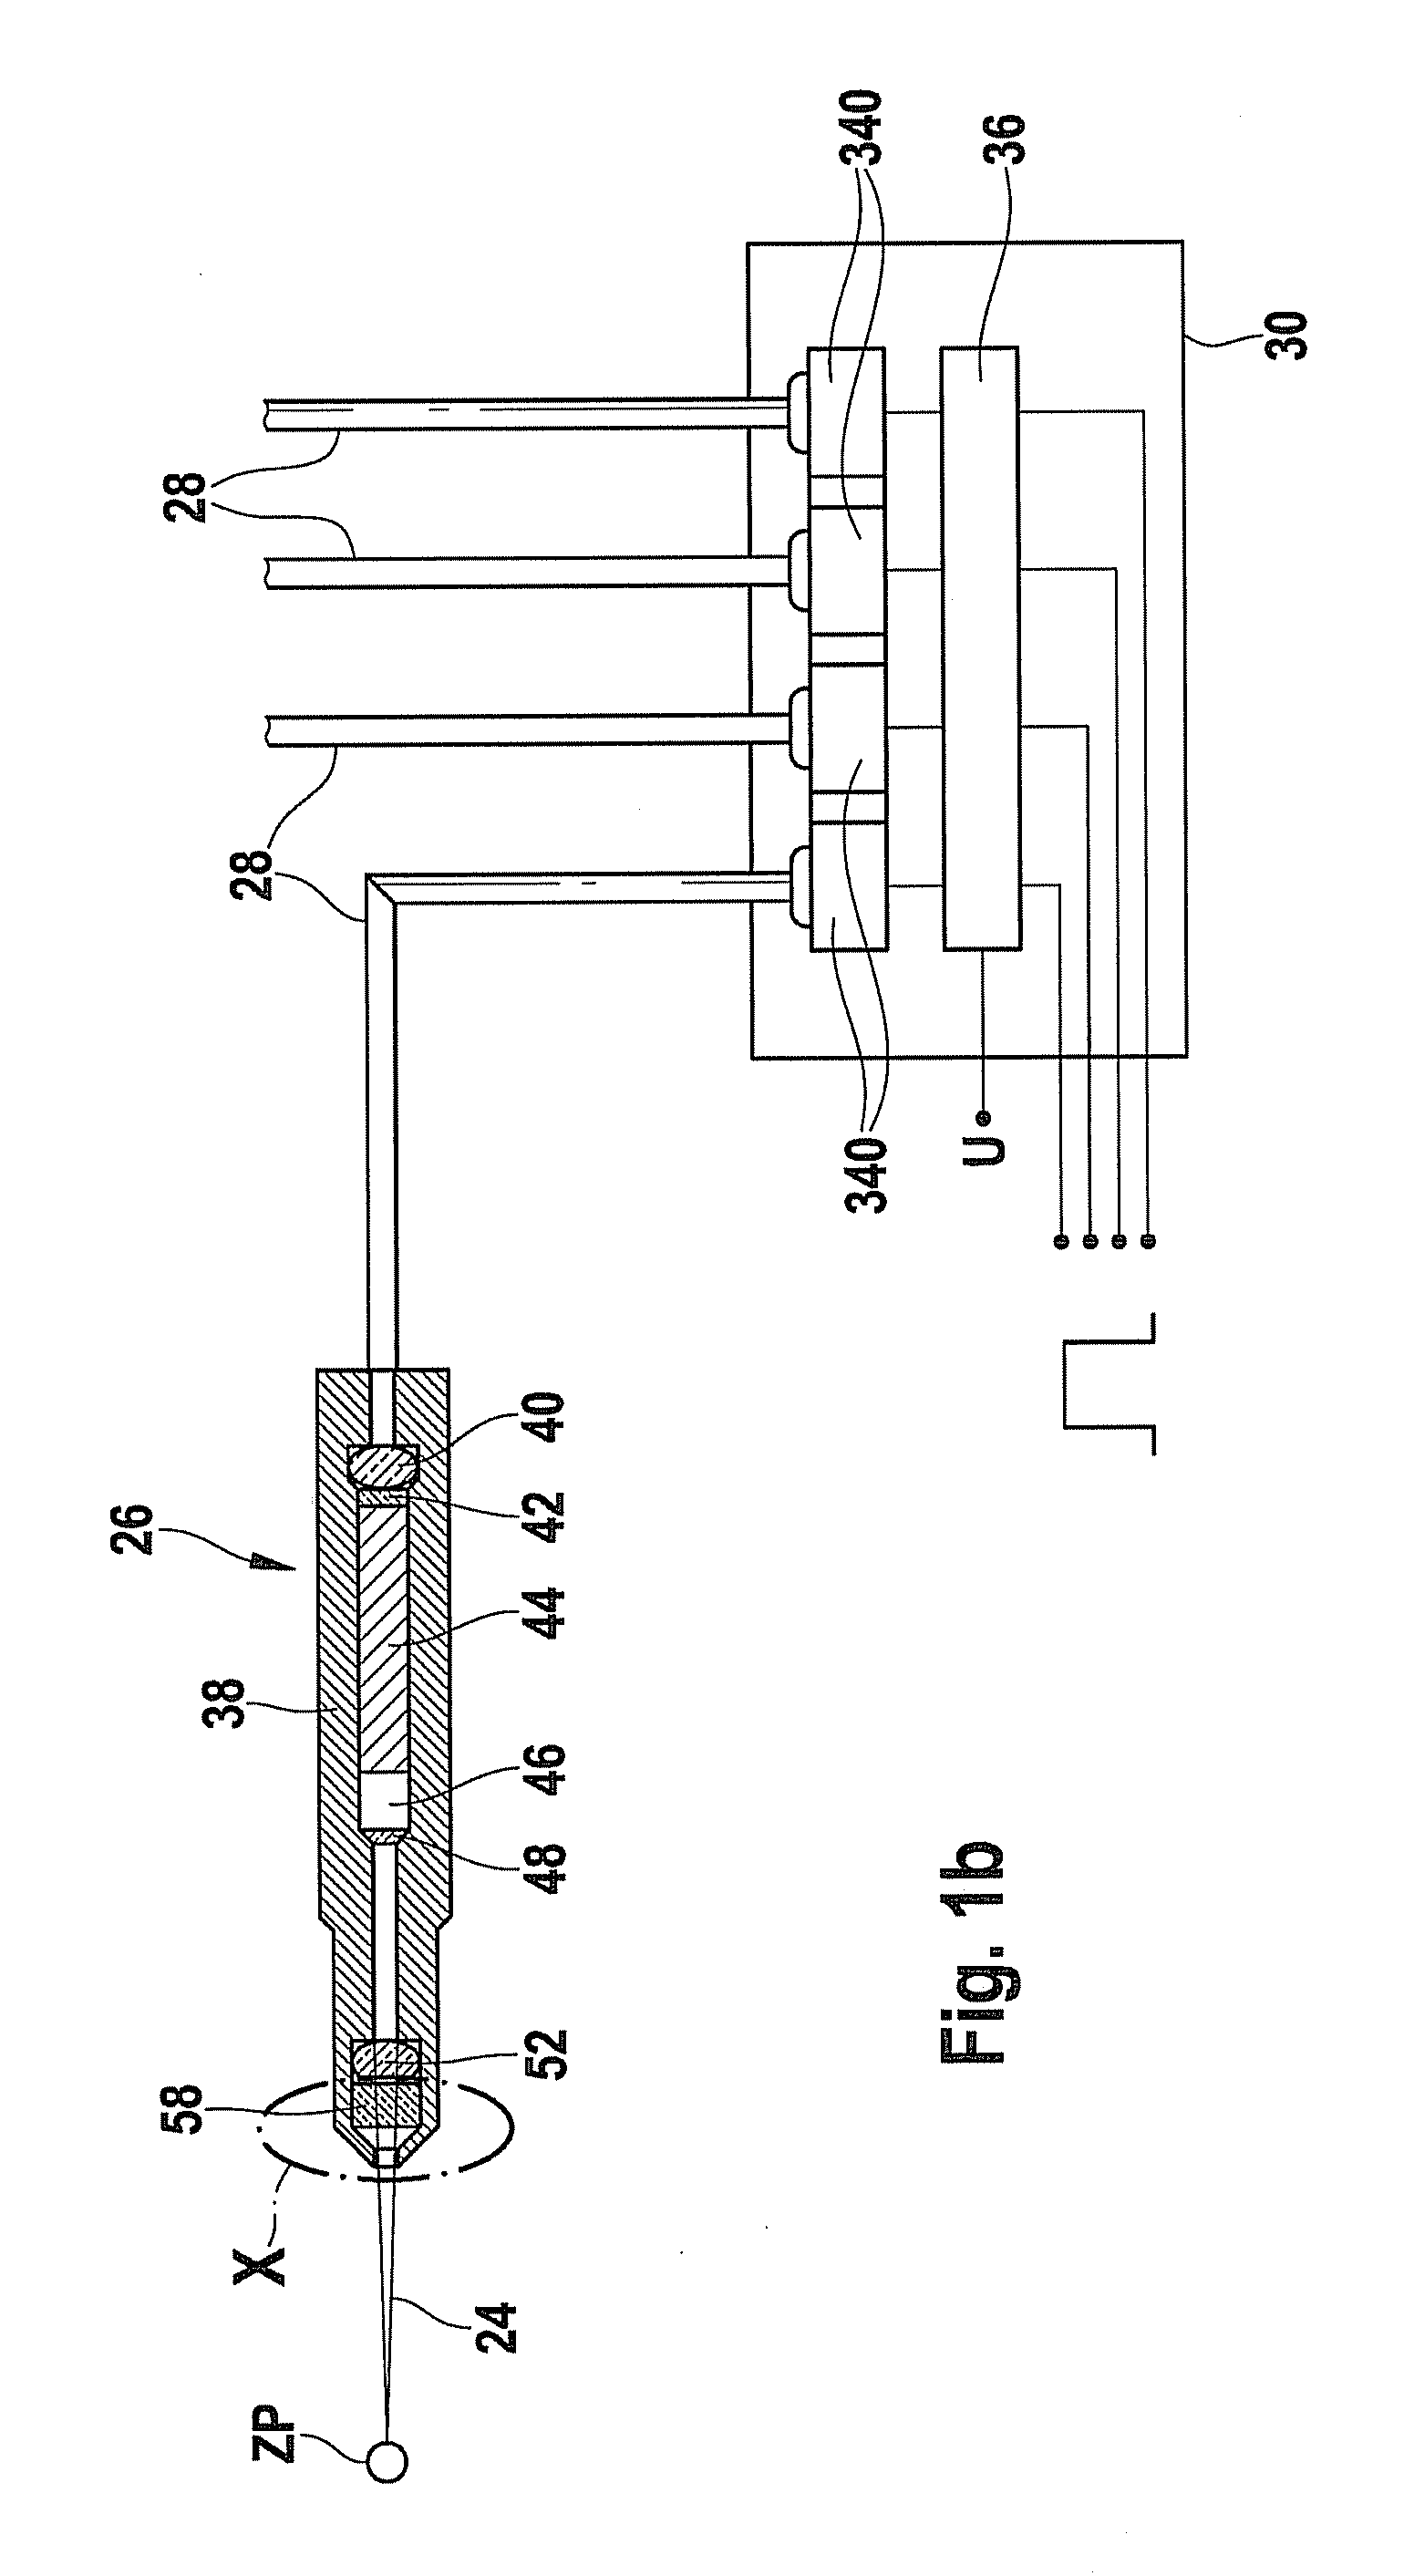 Ignition device for a laser ignition system of an internal combustion engine